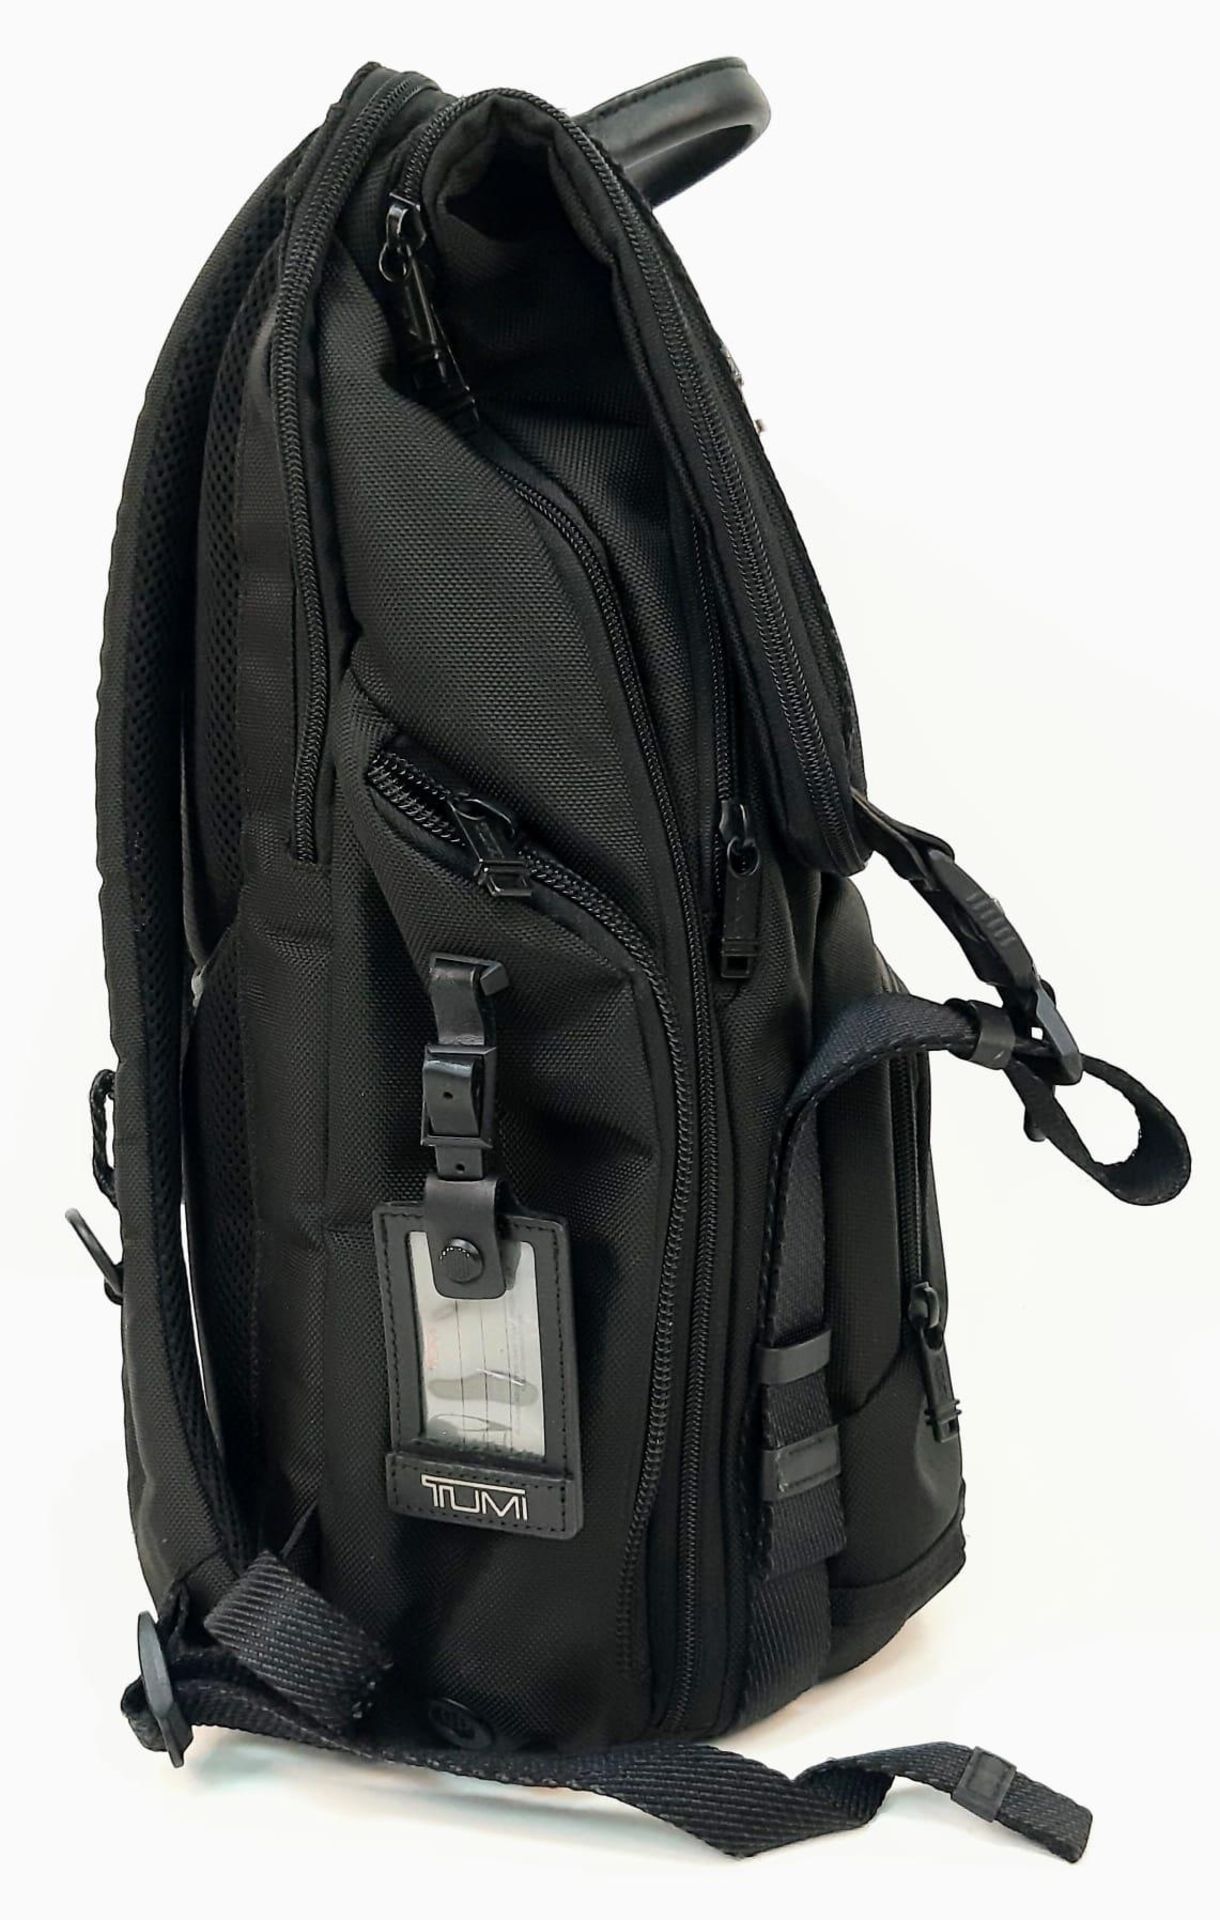 A TUMI Lark Black Backpack, 23L Capacity, Pockets for 16" Laptop, Tablet, Phone and Water Bottle. - Bild 4 aus 6